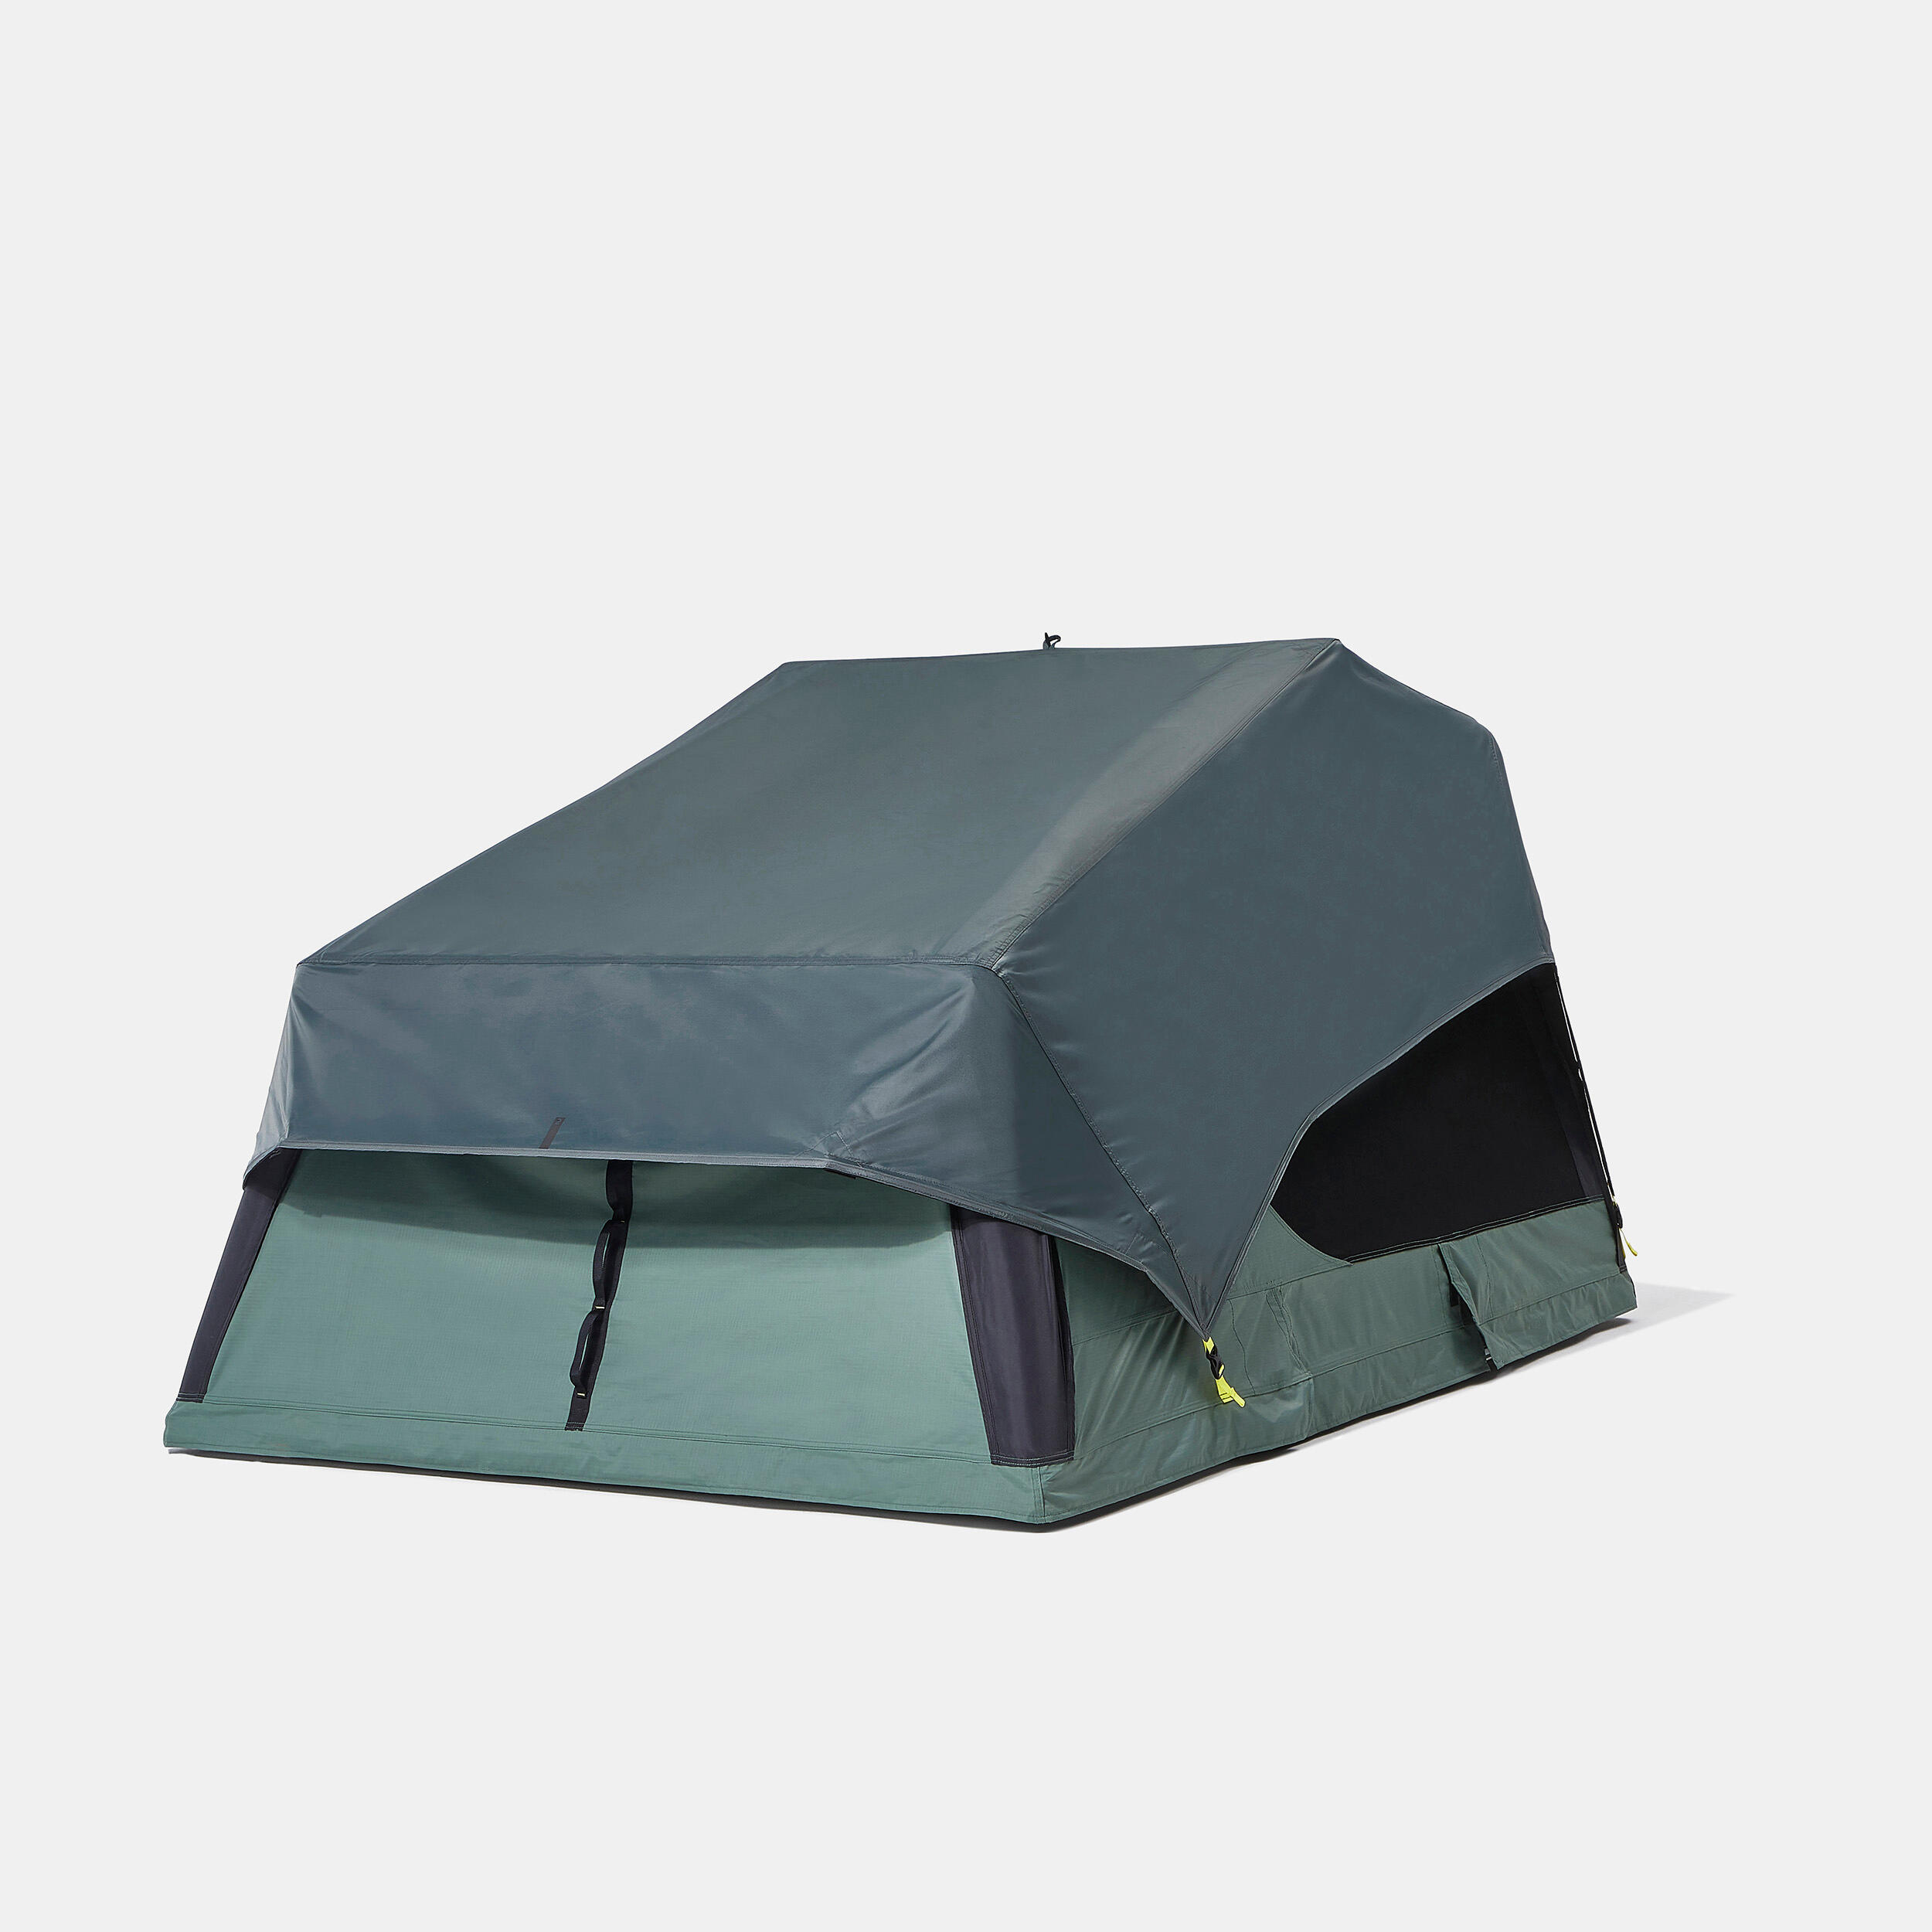 INFLATABLE ROOF TENT MH900 FRESH & BLACK 2 PERSON  16/20